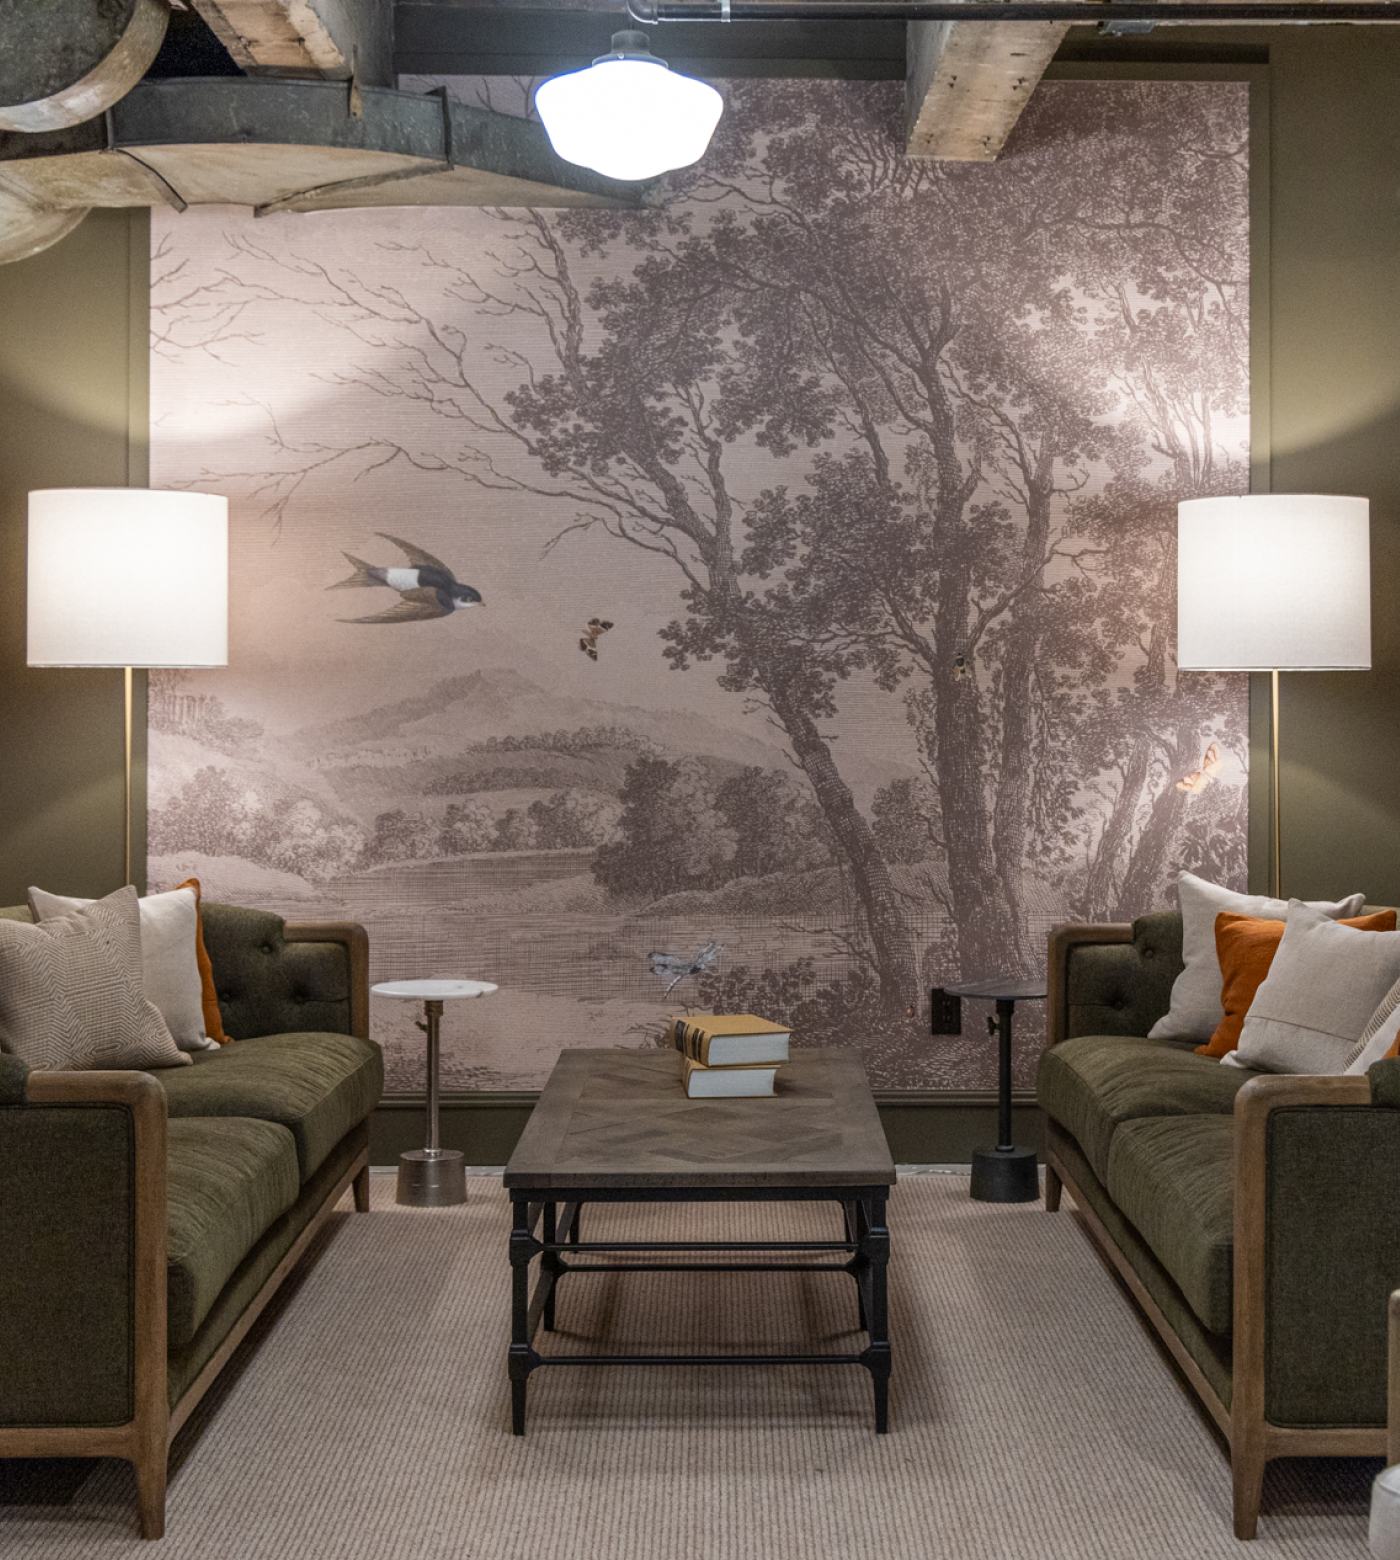 View of lobby lounge back wall with large piece of art depicting a duck flying over a pond with trees